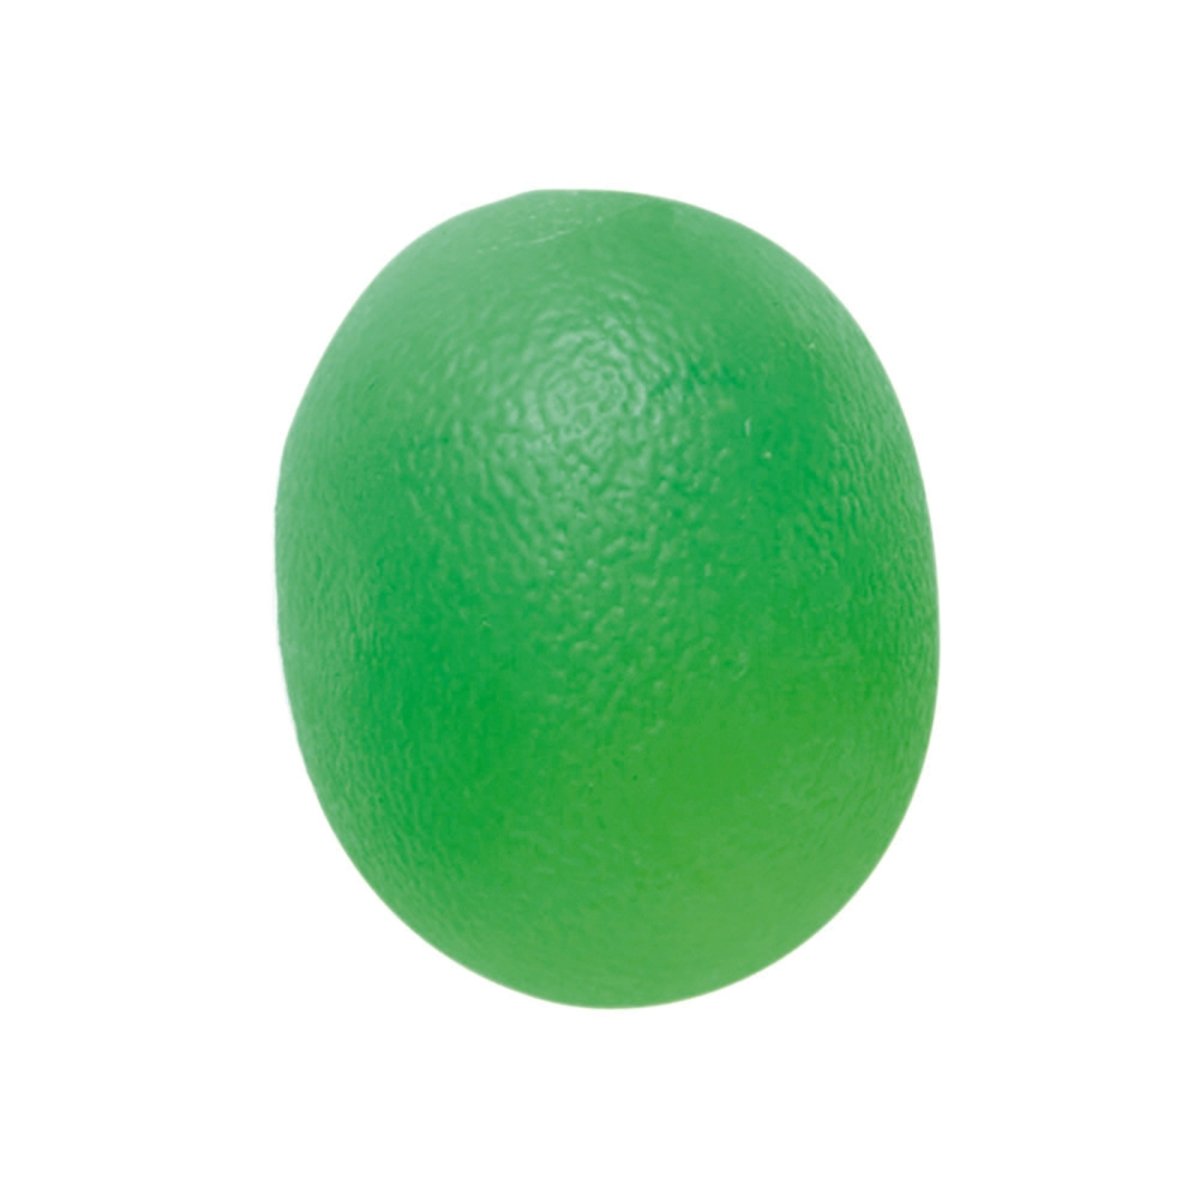 CanDo Large Cylindrical Gel Squeeze Ball, Green, Medium - 803361_EA - 1